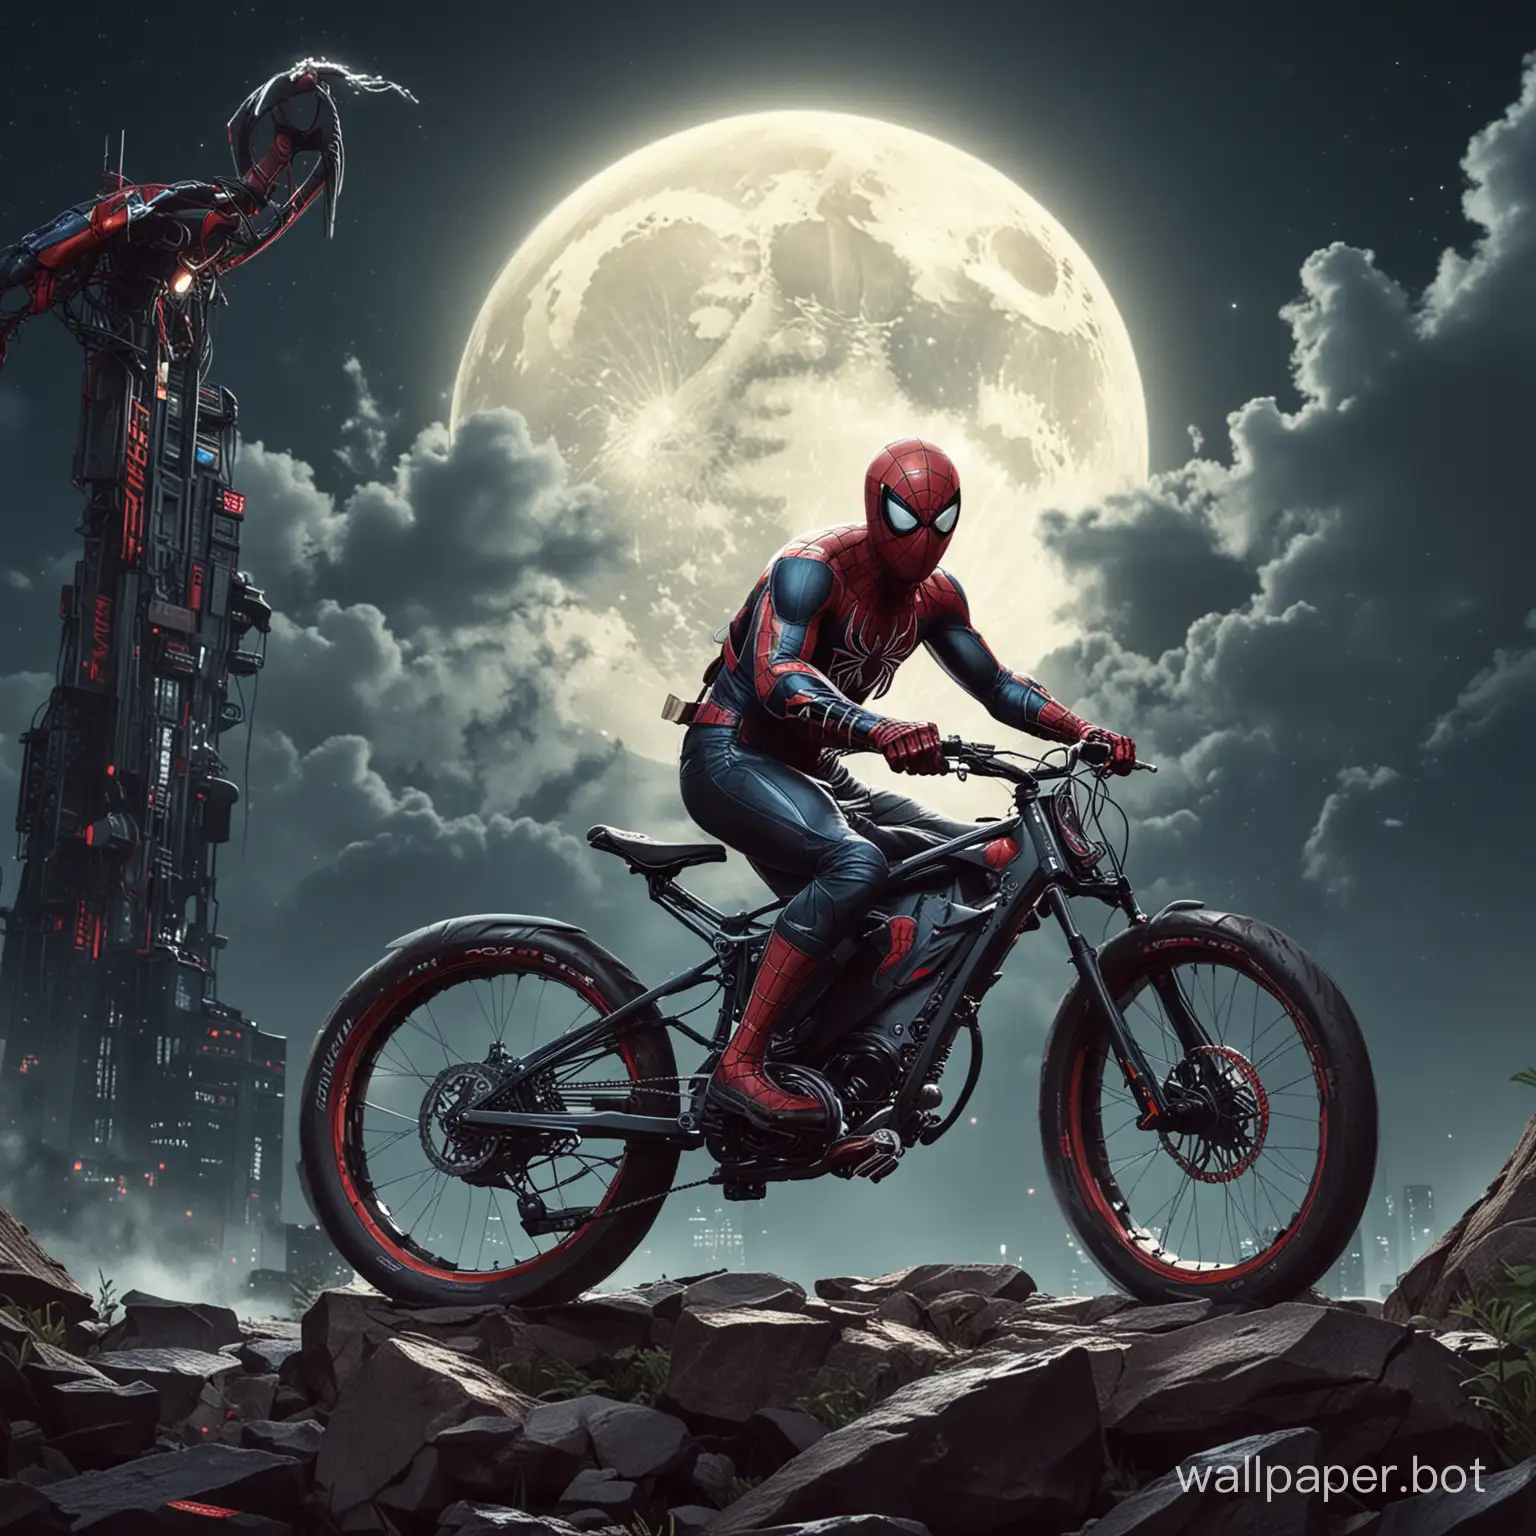 generate a wallpaper for my pc (include ebike, moon, Spiderman AI touch up which represent new edge era tech gig fan vibe and some frenk boroni touch up also )